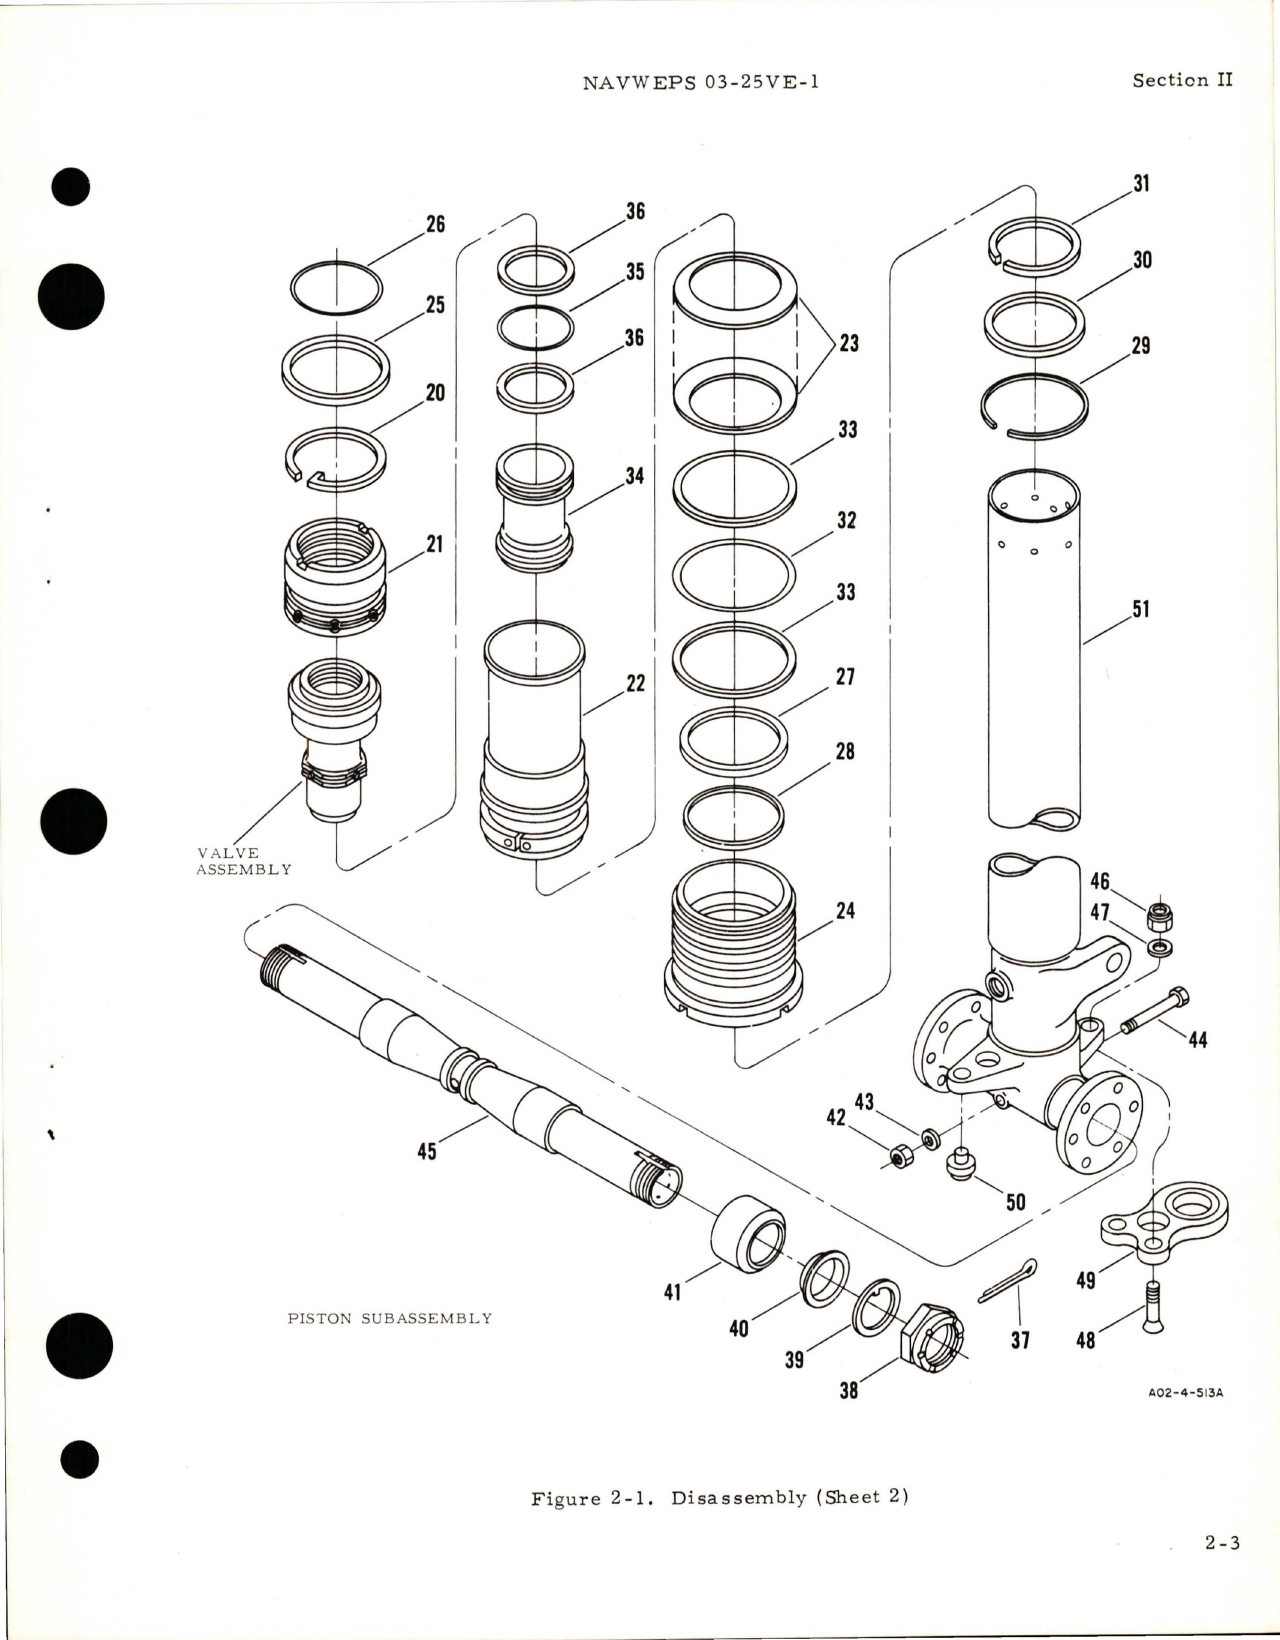 Sample page 9 from AirCorps Library document: Overhaul Instructions for Main Gear Shock Strut Assembly - Part A02L1000-1, A02L1000-3, A02L1000-5, and A02L1000-7 